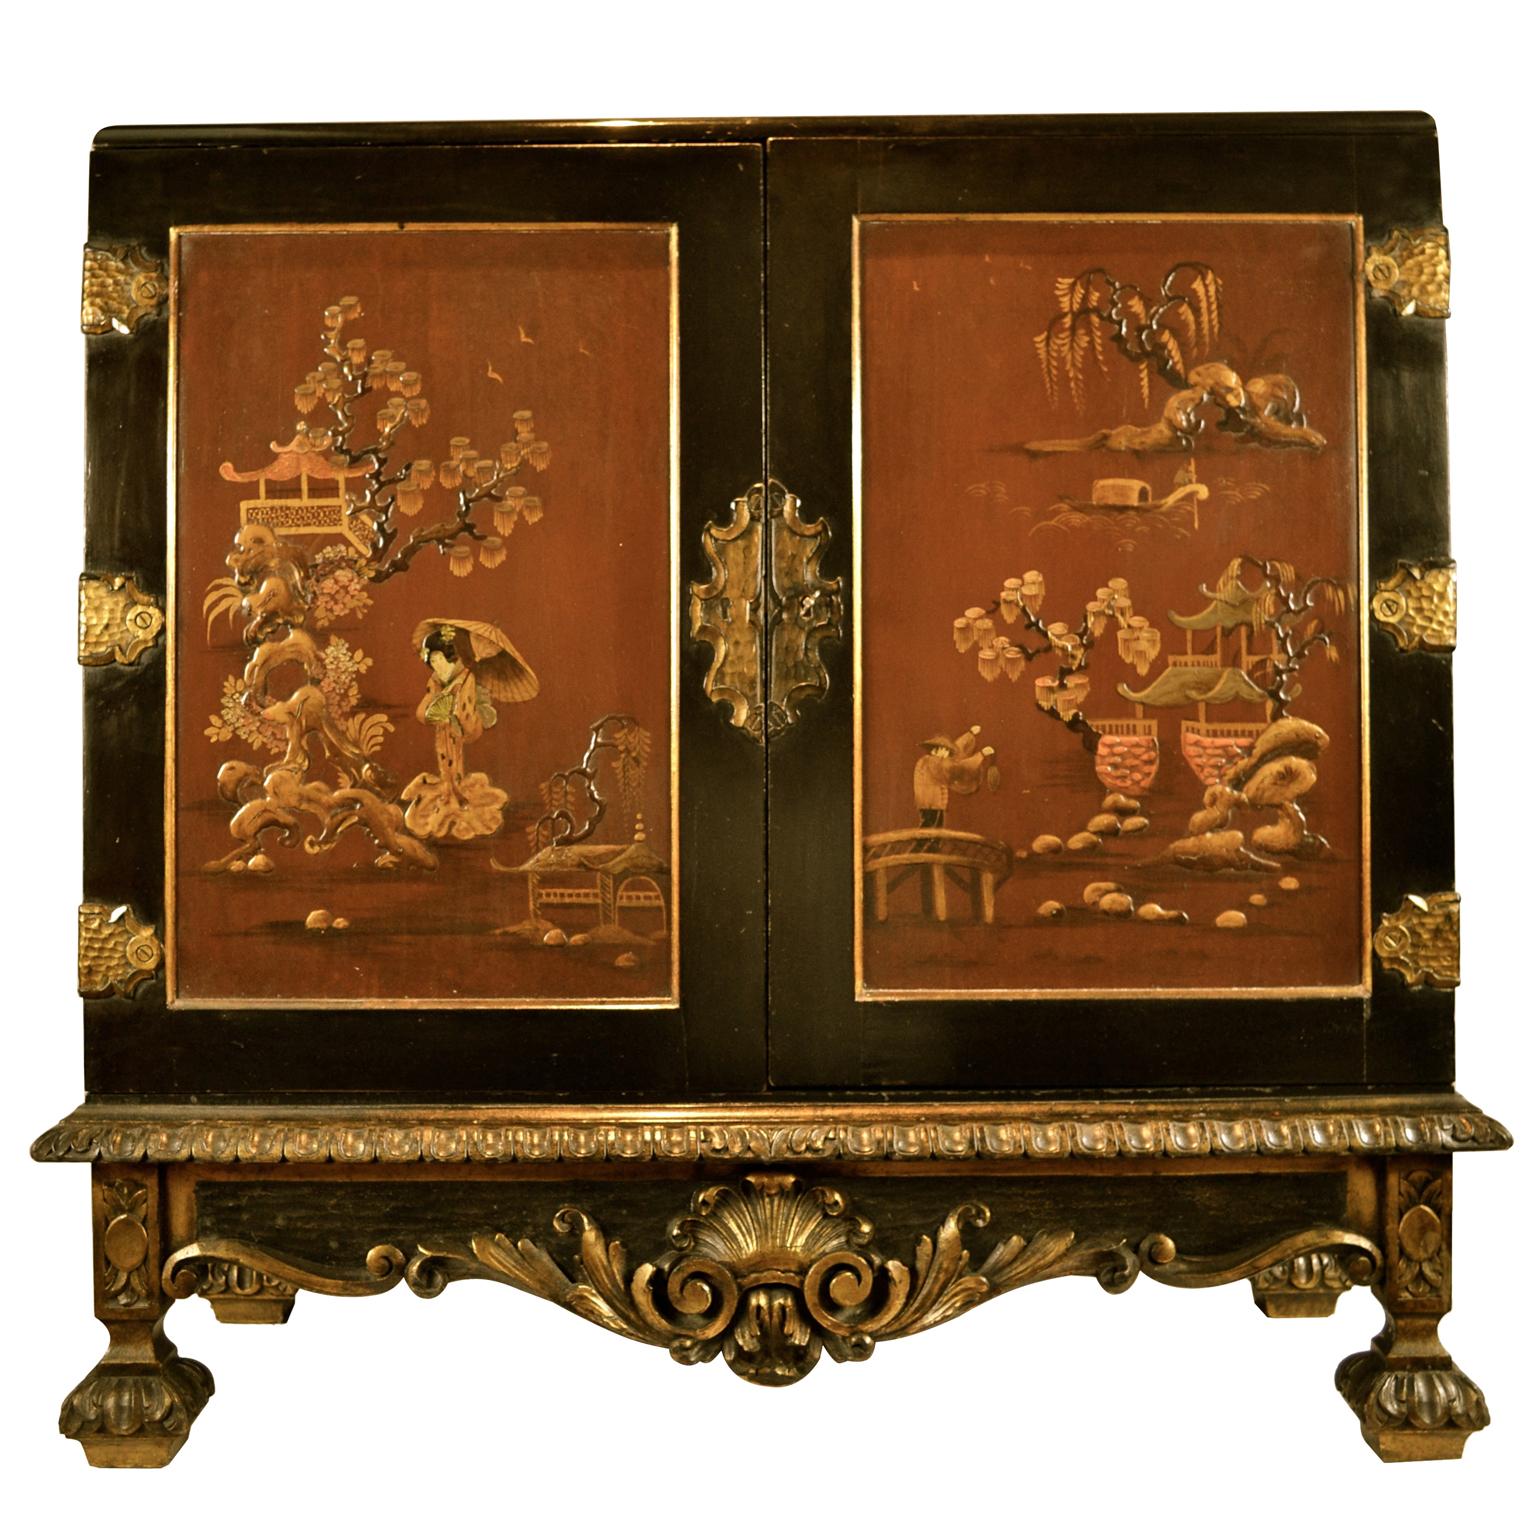 A decorative two-door ebonized oriental lacquer commode in the George II style. The ebonized cabinet sitting on a gilt decorated scroll base, the two door fronts with gilt metal oriental hinges are painted in red lacquer with embossed with Japanese